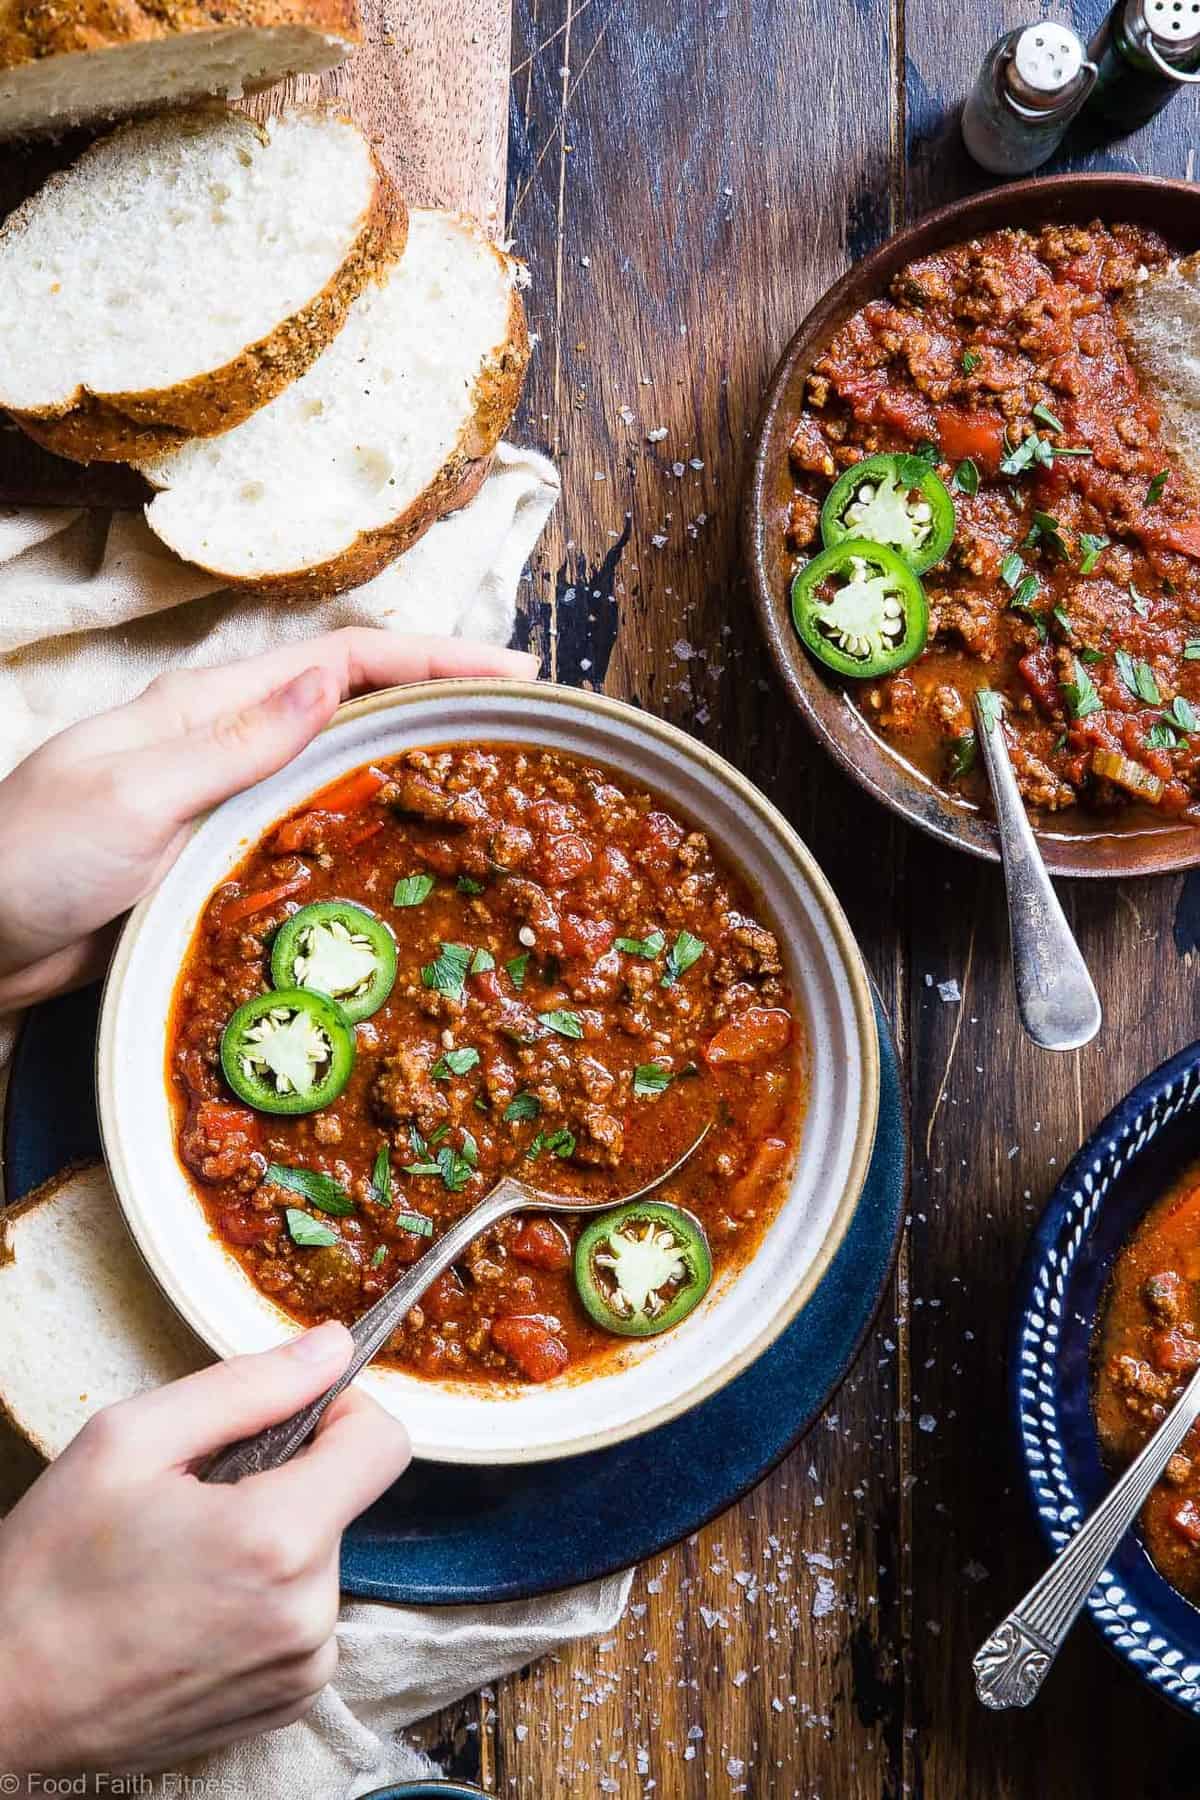 Instant Pot Whole30 Keto Chili - This paleo chili is a meat lovers dream! It's the easiest healthy weeknight dinner that the whole family will love and it freezes great for leftovers or meal prep! | #Foodfaithfitness | #Keto #Lowcarb #Paleo #Whole3o #InstantPot